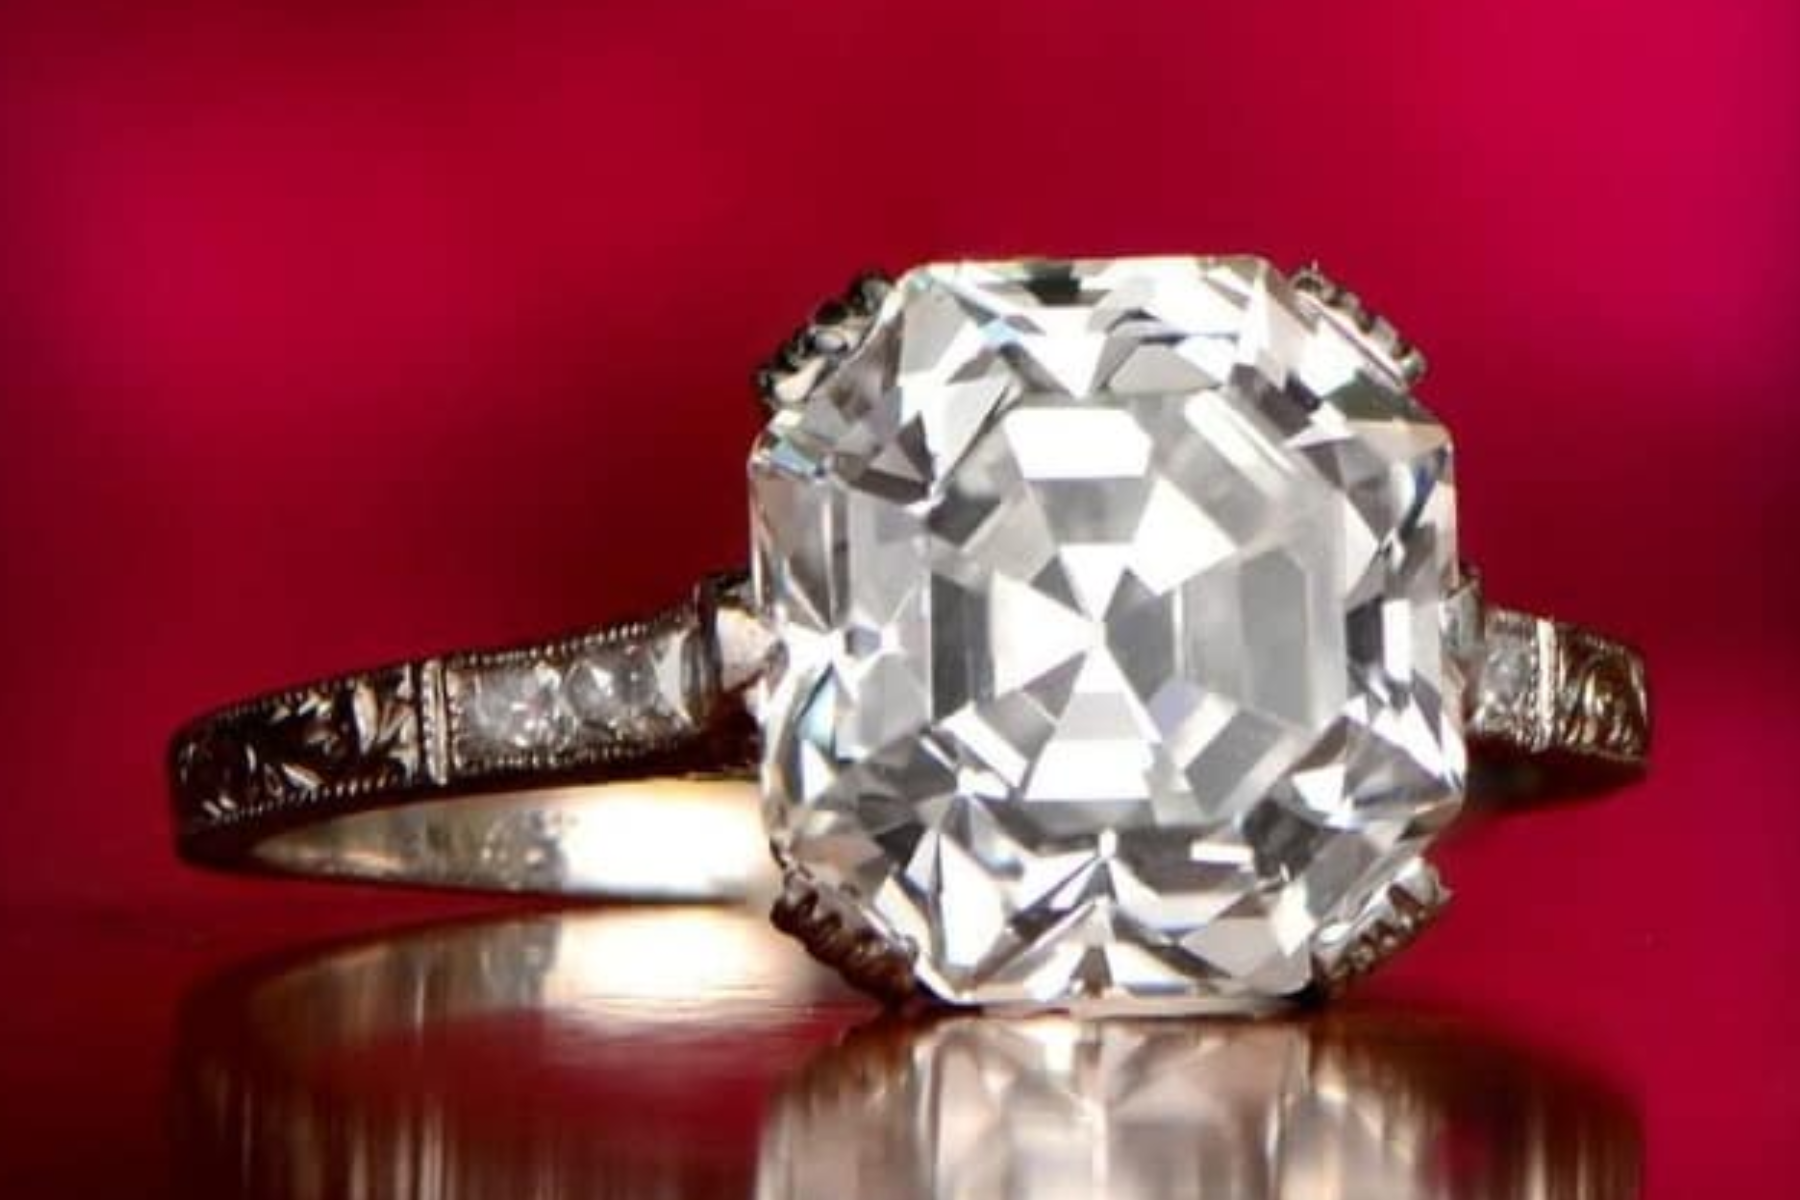 A close-up photograph of an engagement ring featuring an Asscher cut diamond set in a band. The ring is placed on a dark red background